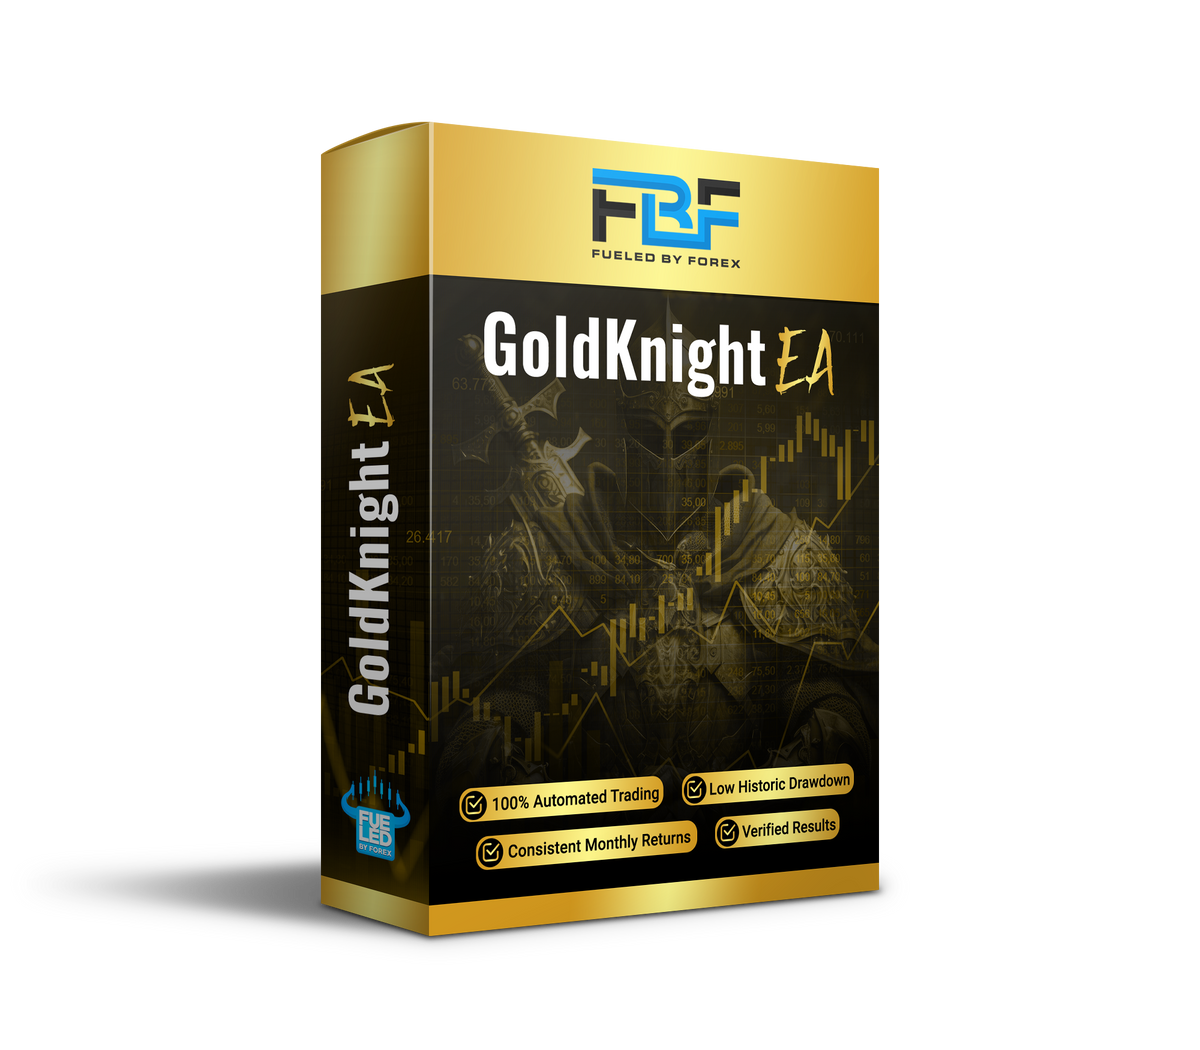 The GoldKnight EA